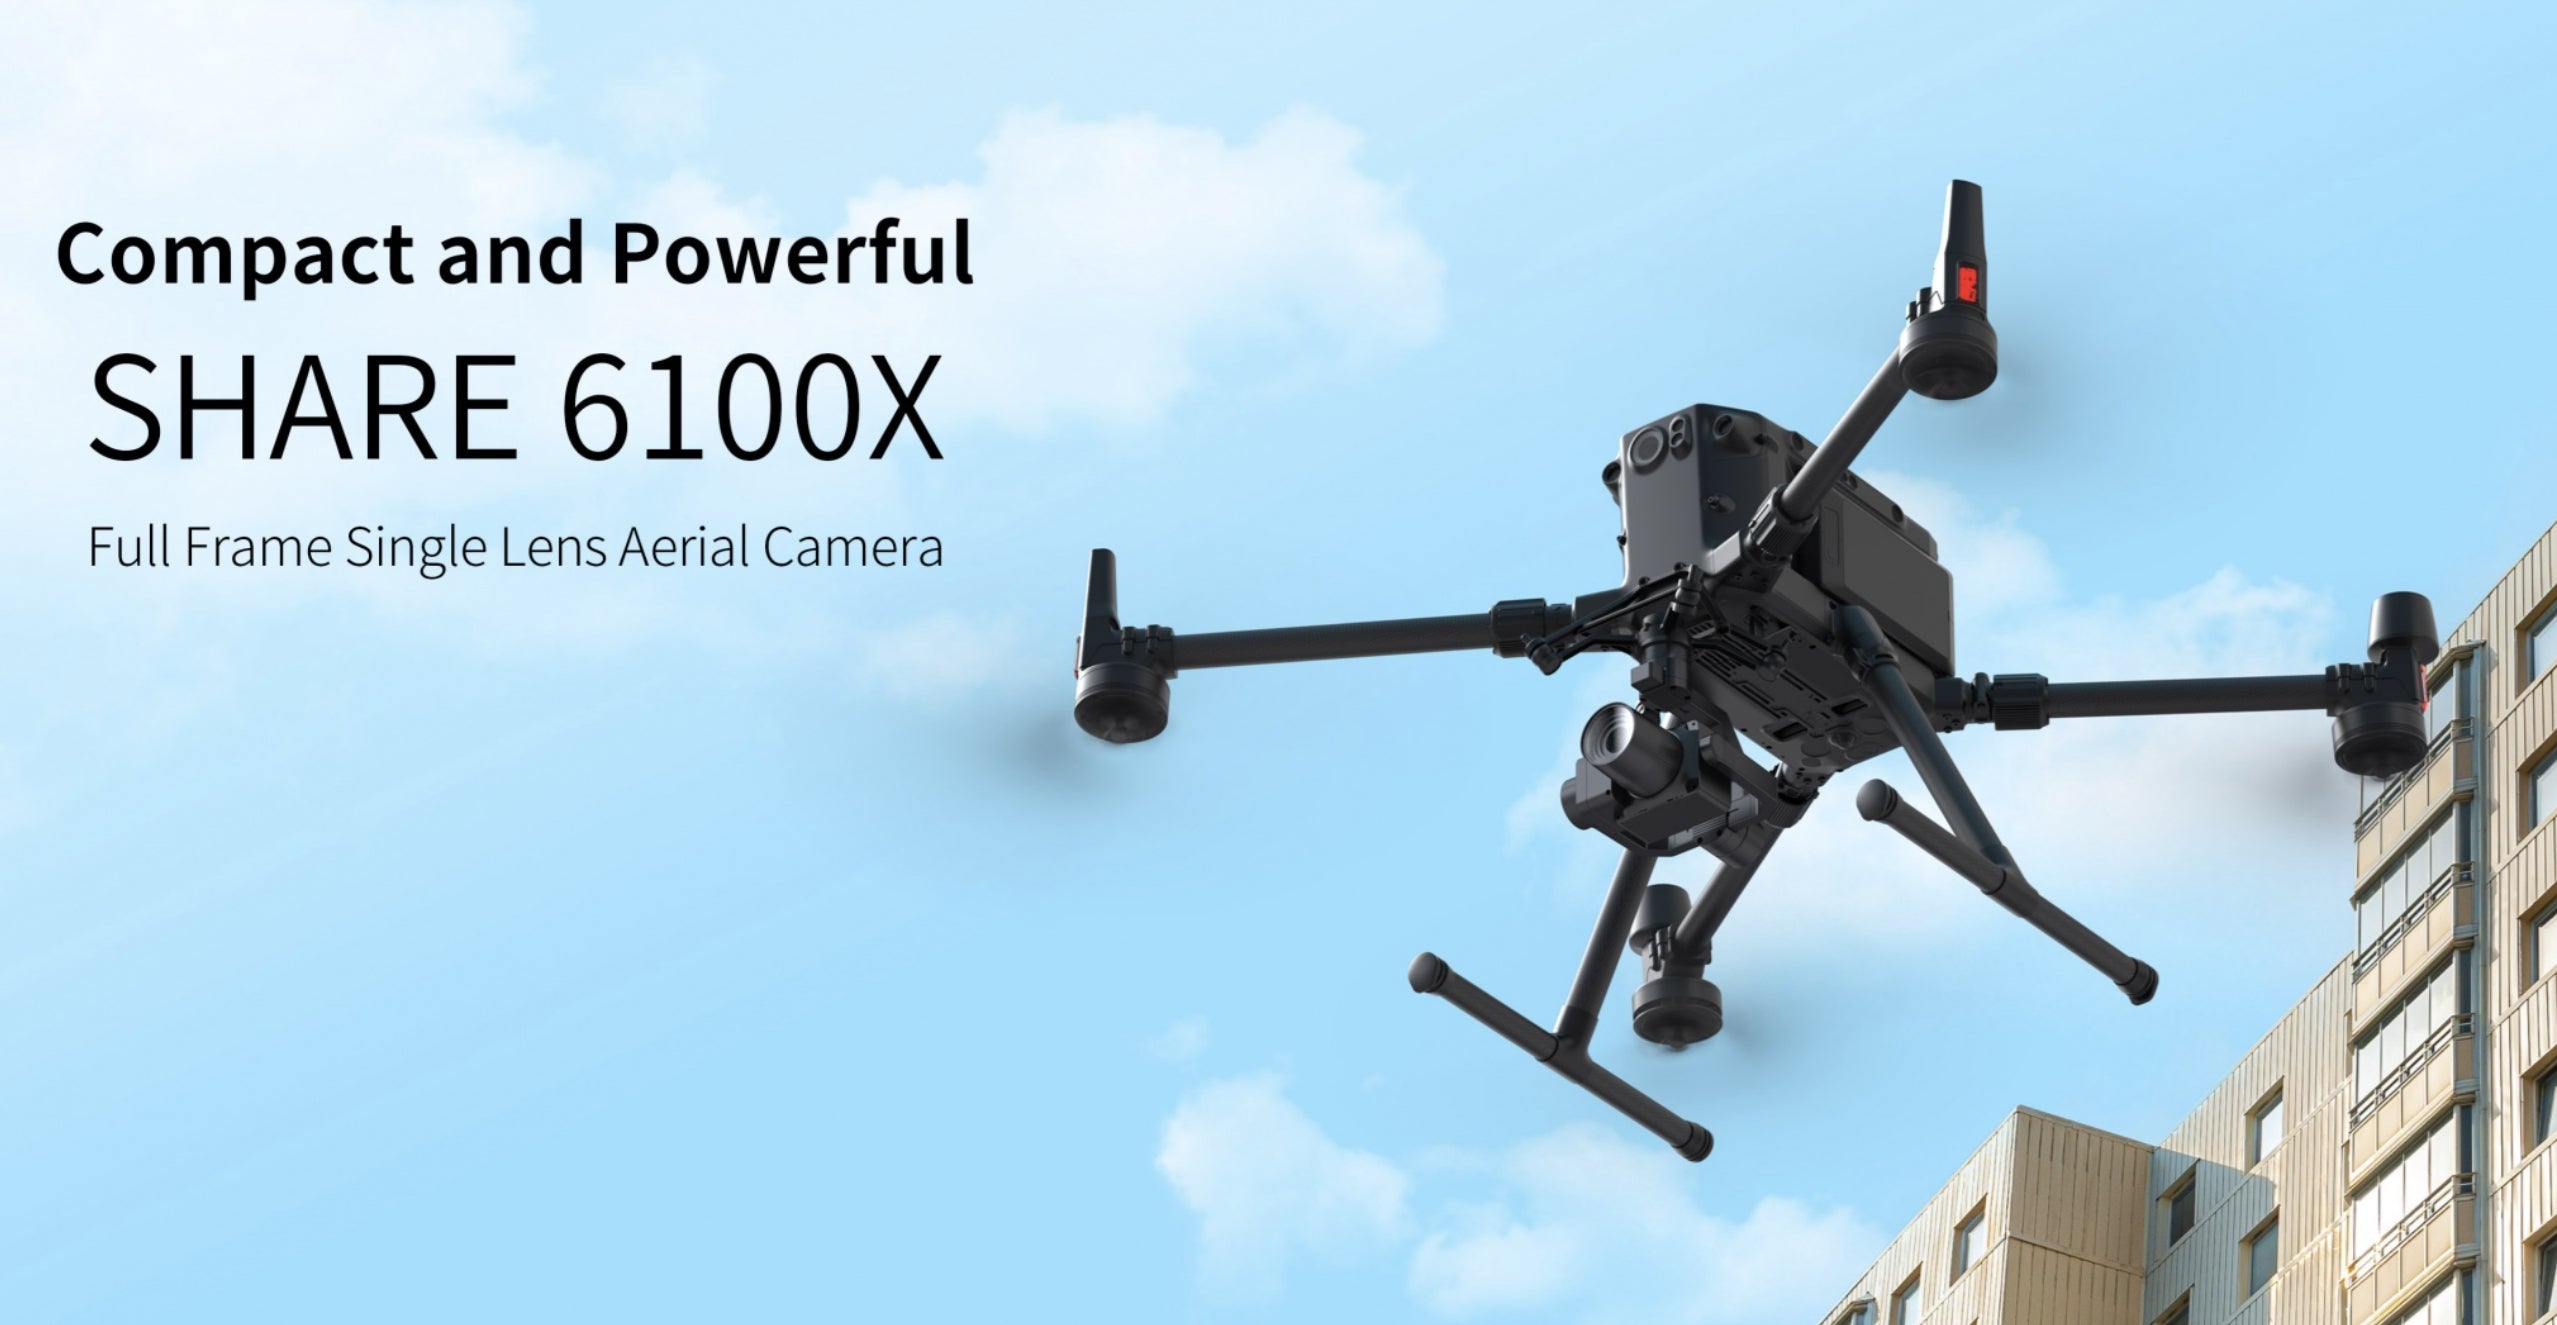 SHARE 6100X, Compact aerial camera for capturing high-quality images with ease.